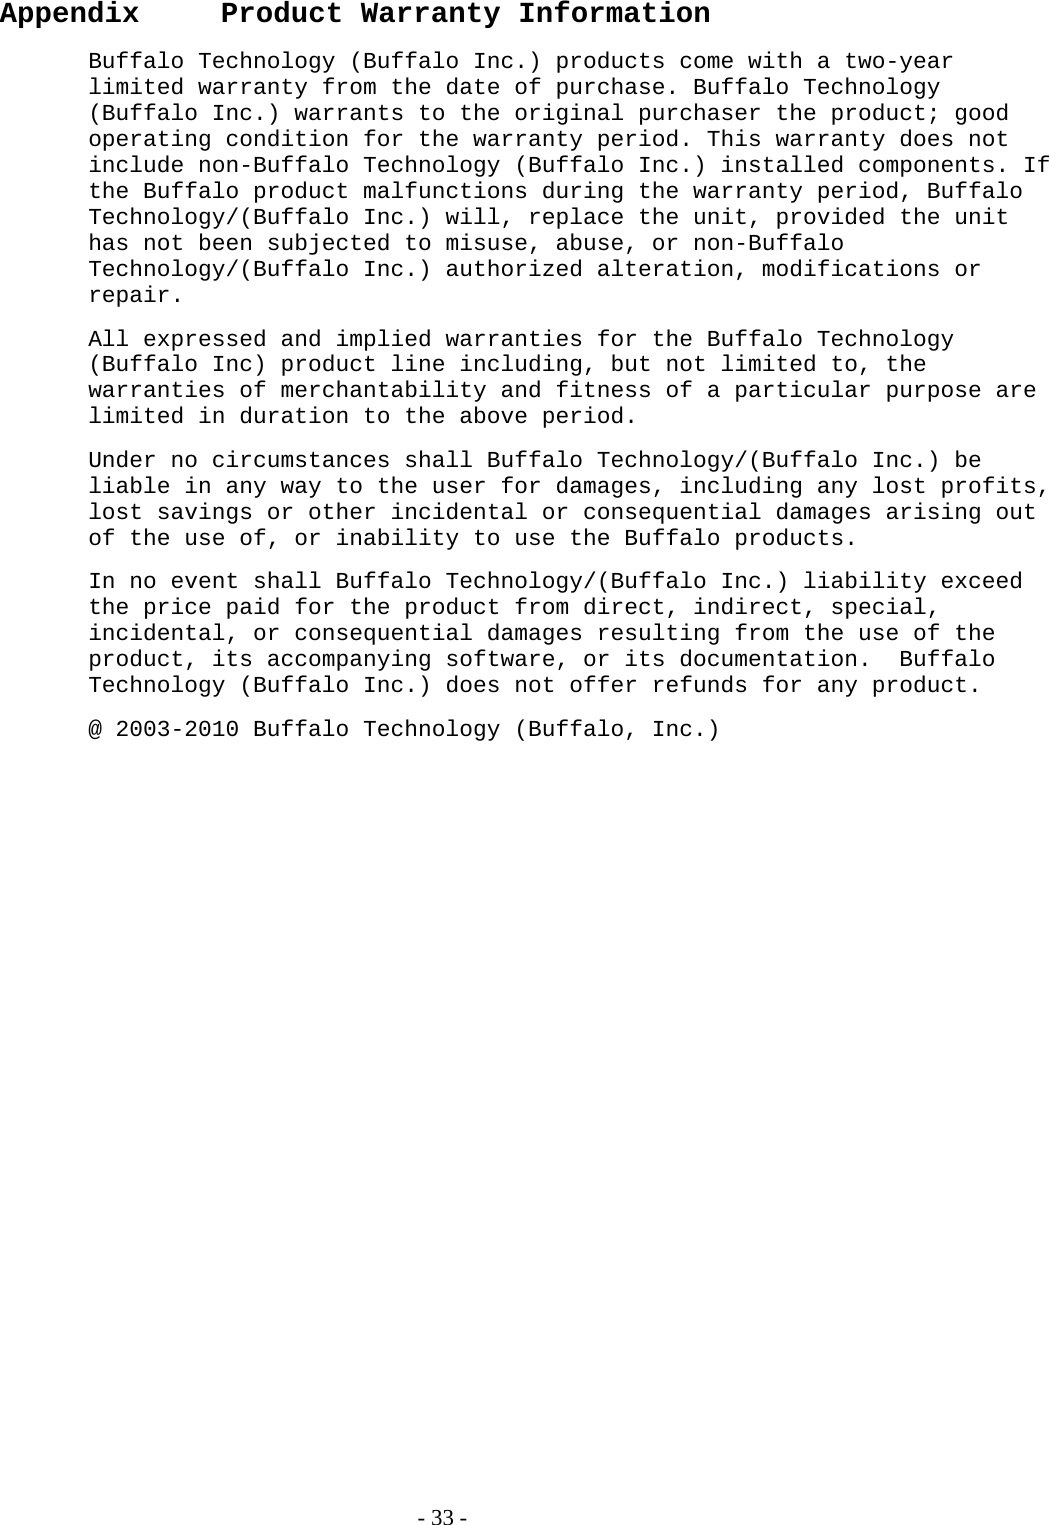   - 33 - Appendix   Product Warranty Information Buffalo Technology (Buffalo Inc.) products come with a two-year limited warranty from the date of purchase. Buffalo Technology (Buffalo Inc.) warrants to the original purchaser the product; good operating condition for the warranty period. This warranty does not include non-Buffalo Technology (Buffalo Inc.) installed components. If the Buffalo product malfunctions during the warranty period, Buffalo Technology/(Buffalo Inc.) will, replace the unit, provided the unit has not been subjected to misuse, abuse, or non-Buffalo Technology/(Buffalo Inc.) authorized alteration, modifications or repair. All expressed and implied warranties for the Buffalo Technology (Buffalo Inc) product line including, but not limited to, the warranties of merchantability and fitness of a particular purpose are limited in duration to the above period. Under no circumstances shall Buffalo Technology/(Buffalo Inc.) be liable in any way to the user for damages, including any lost profits, lost savings or other incidental or consequential damages arising out of the use of, or inability to use the Buffalo products. In no event shall Buffalo Technology/(Buffalo Inc.) liability exceed the price paid for the product from direct, indirect, special, incidental, or consequential damages resulting from the use of the product, its accompanying software, or its documentation.  Buffalo Technology (Buffalo Inc.) does not offer refunds for any product. @ 2003-2010 Buffalo Technology (Buffalo, Inc.)  